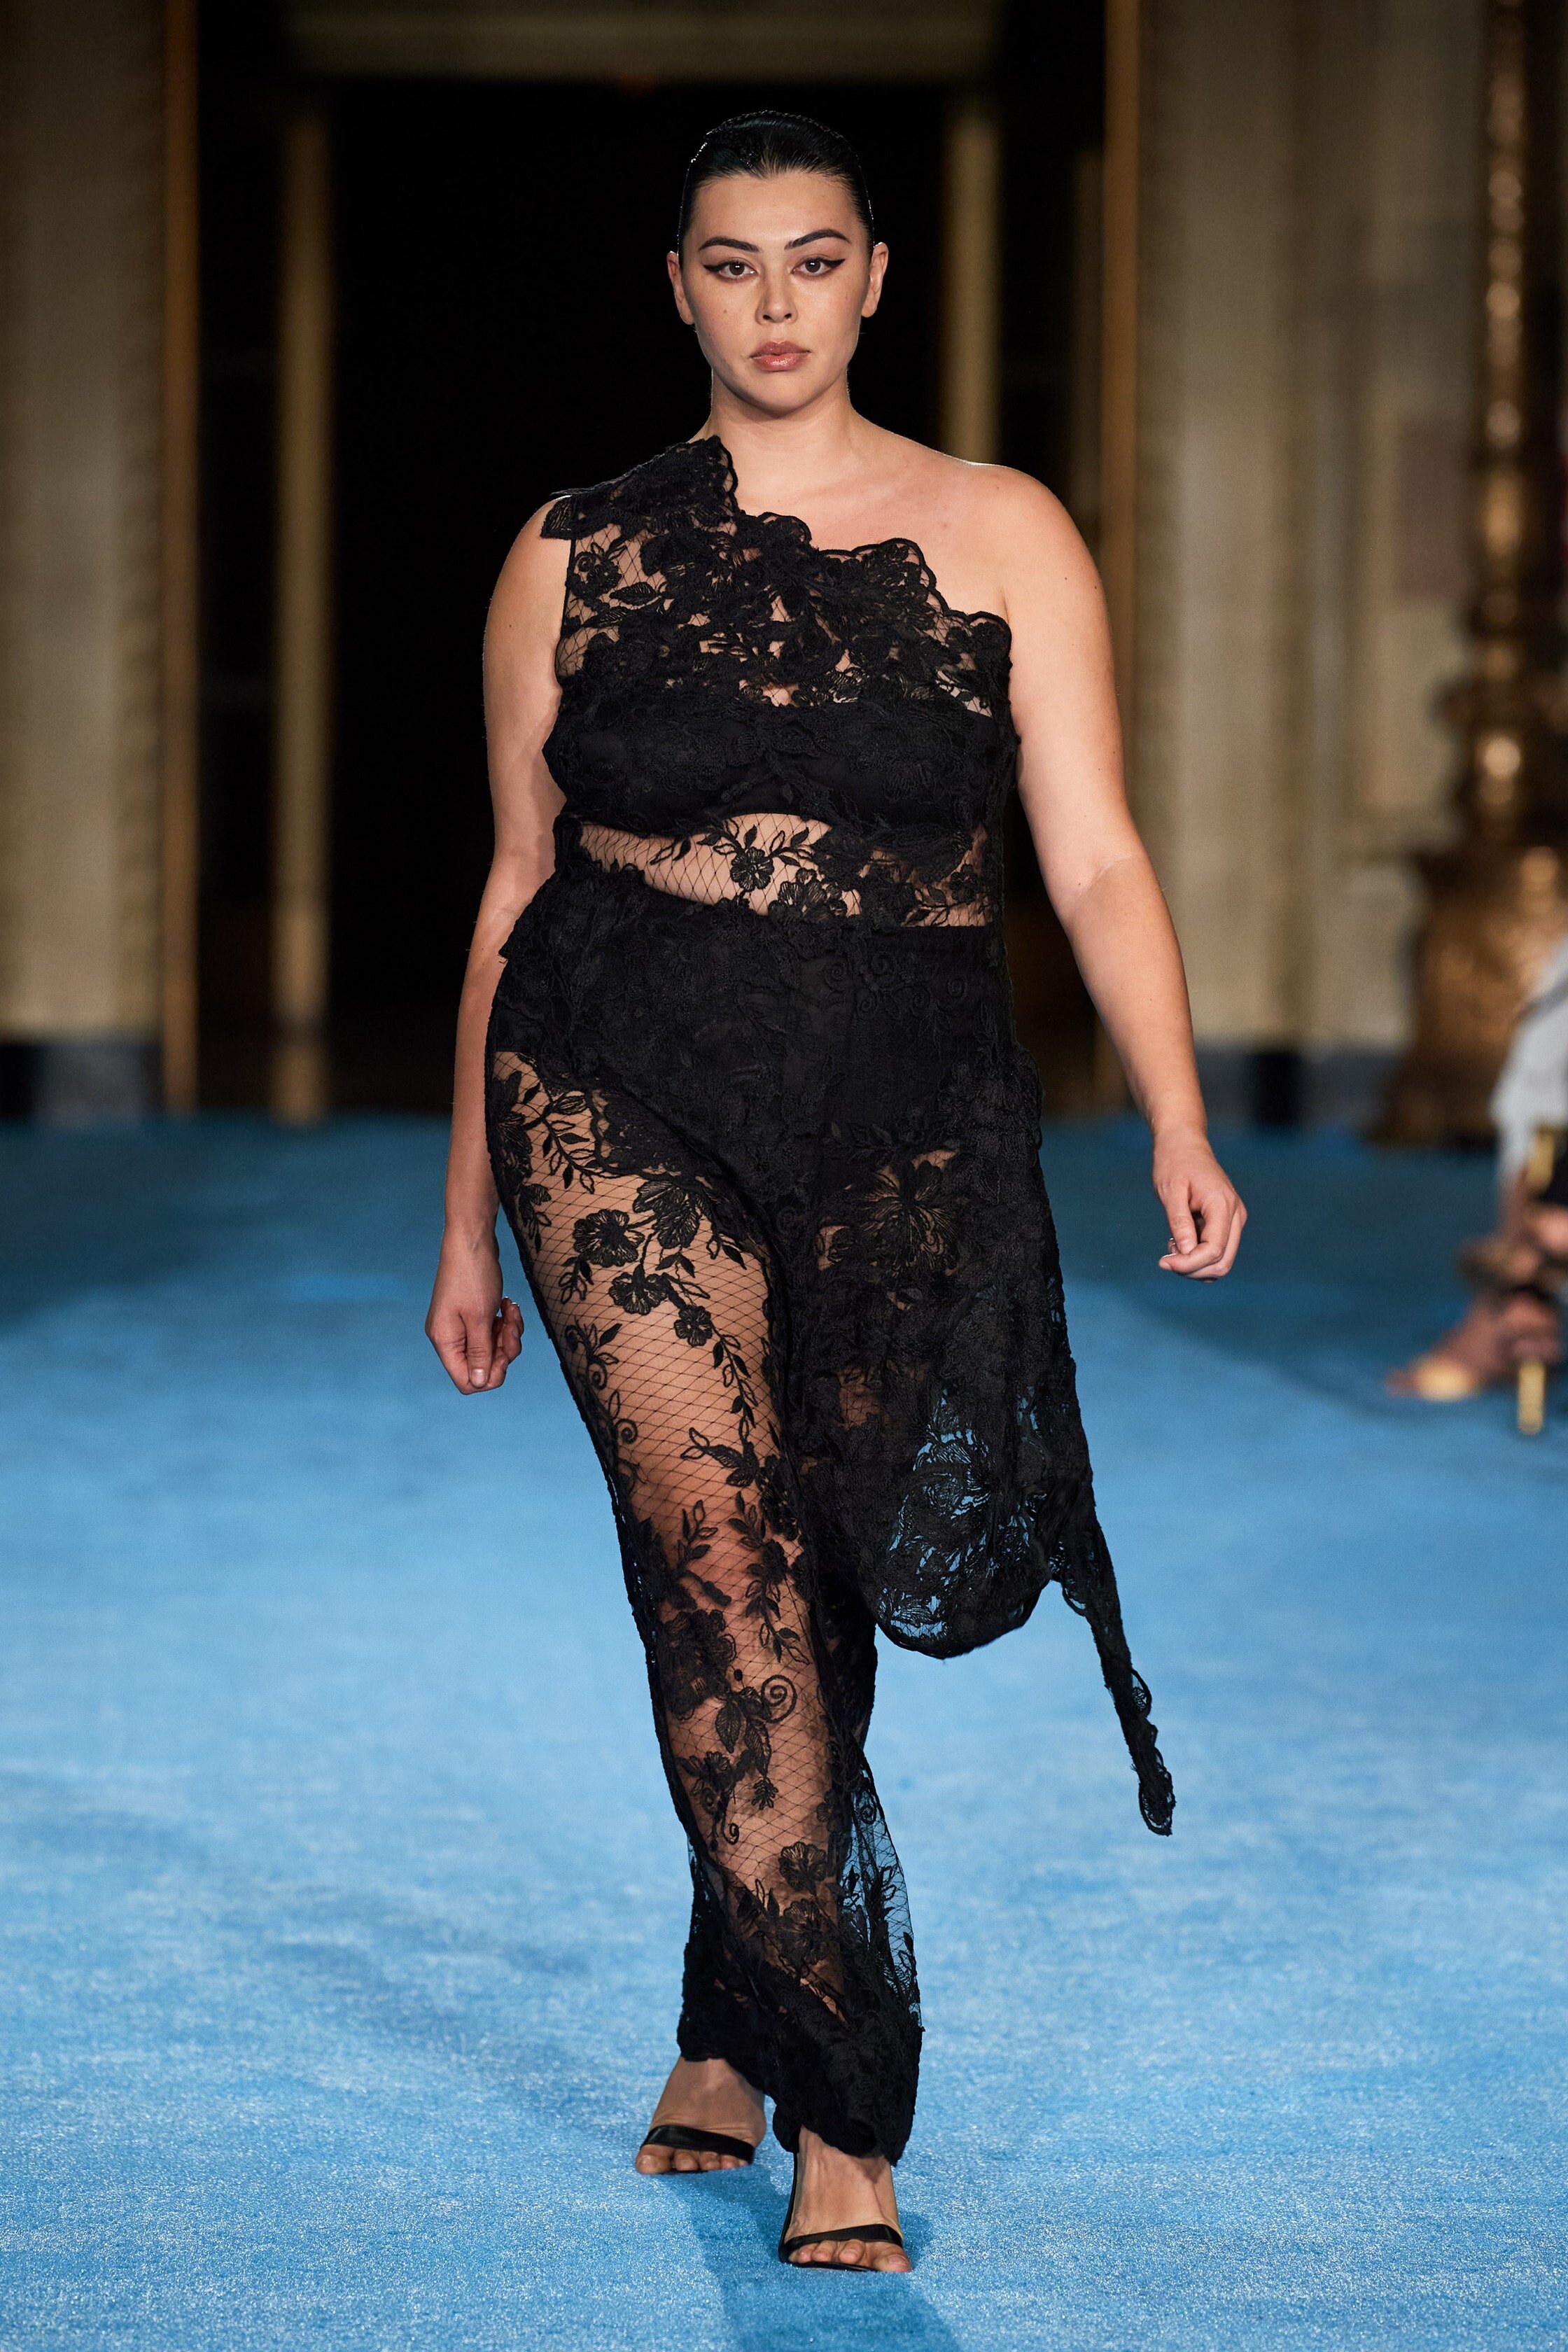 Christian Siriano Understood the Assignment — Shapely | Lifestyle for ...